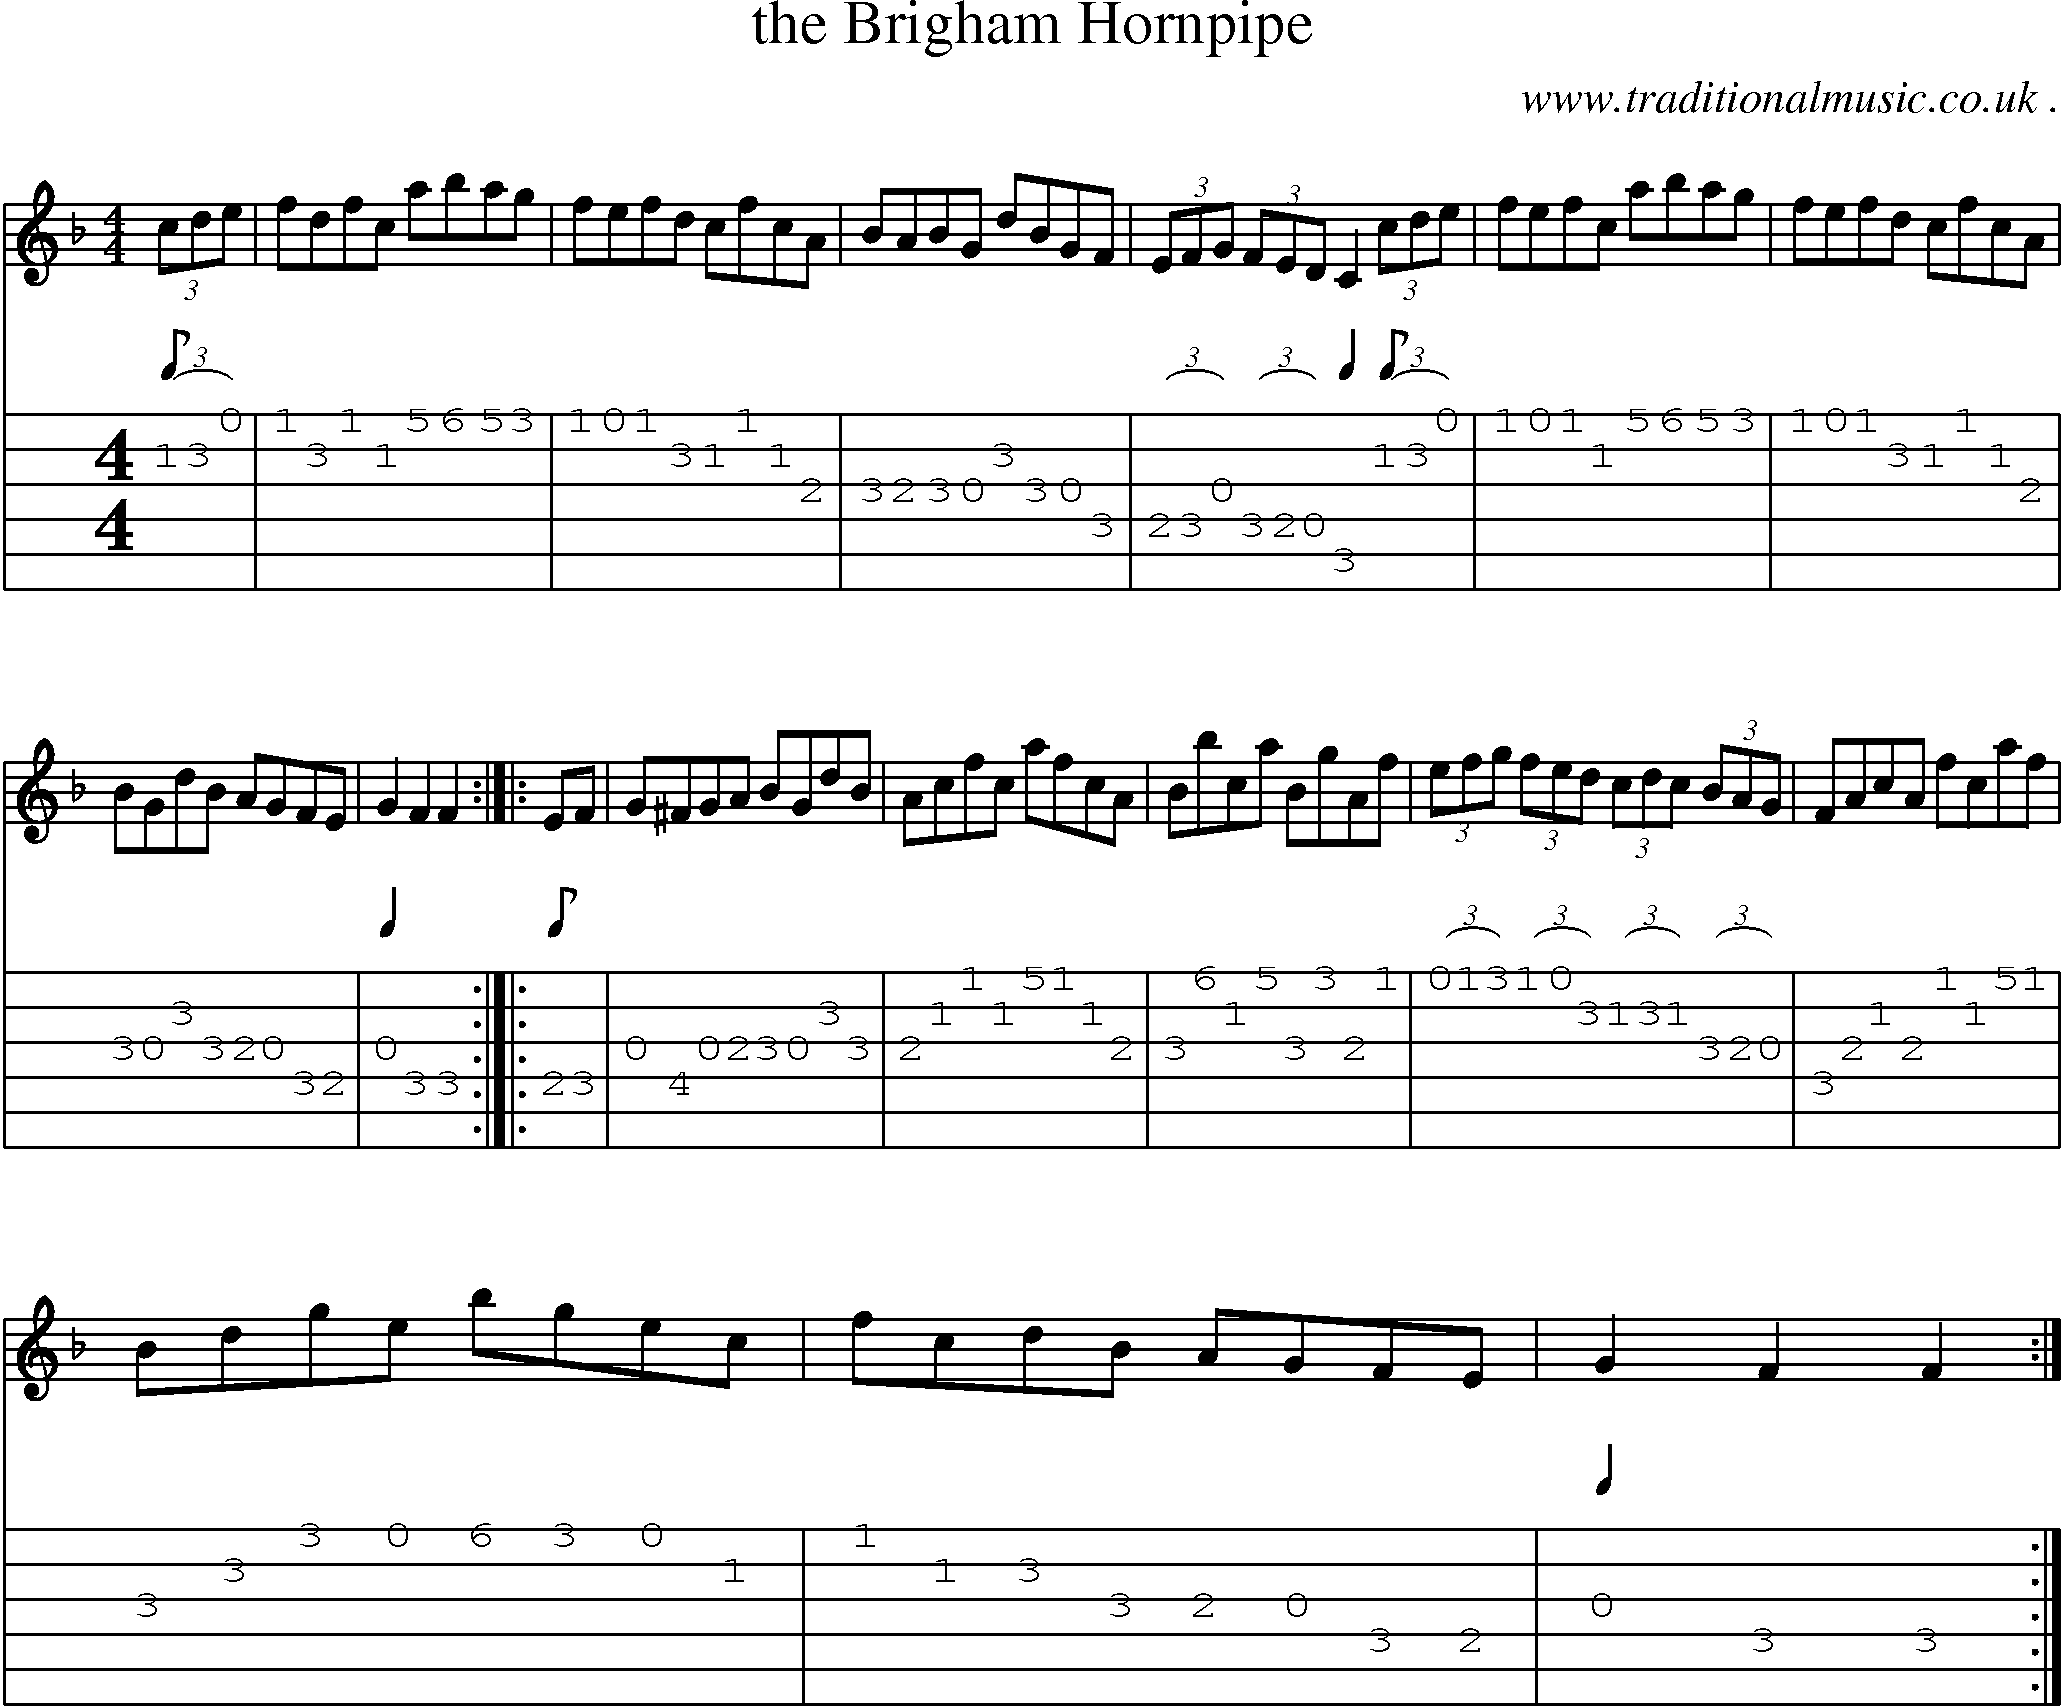 Sheet-Music and Guitar Tabs for The Brigham Hornpipe